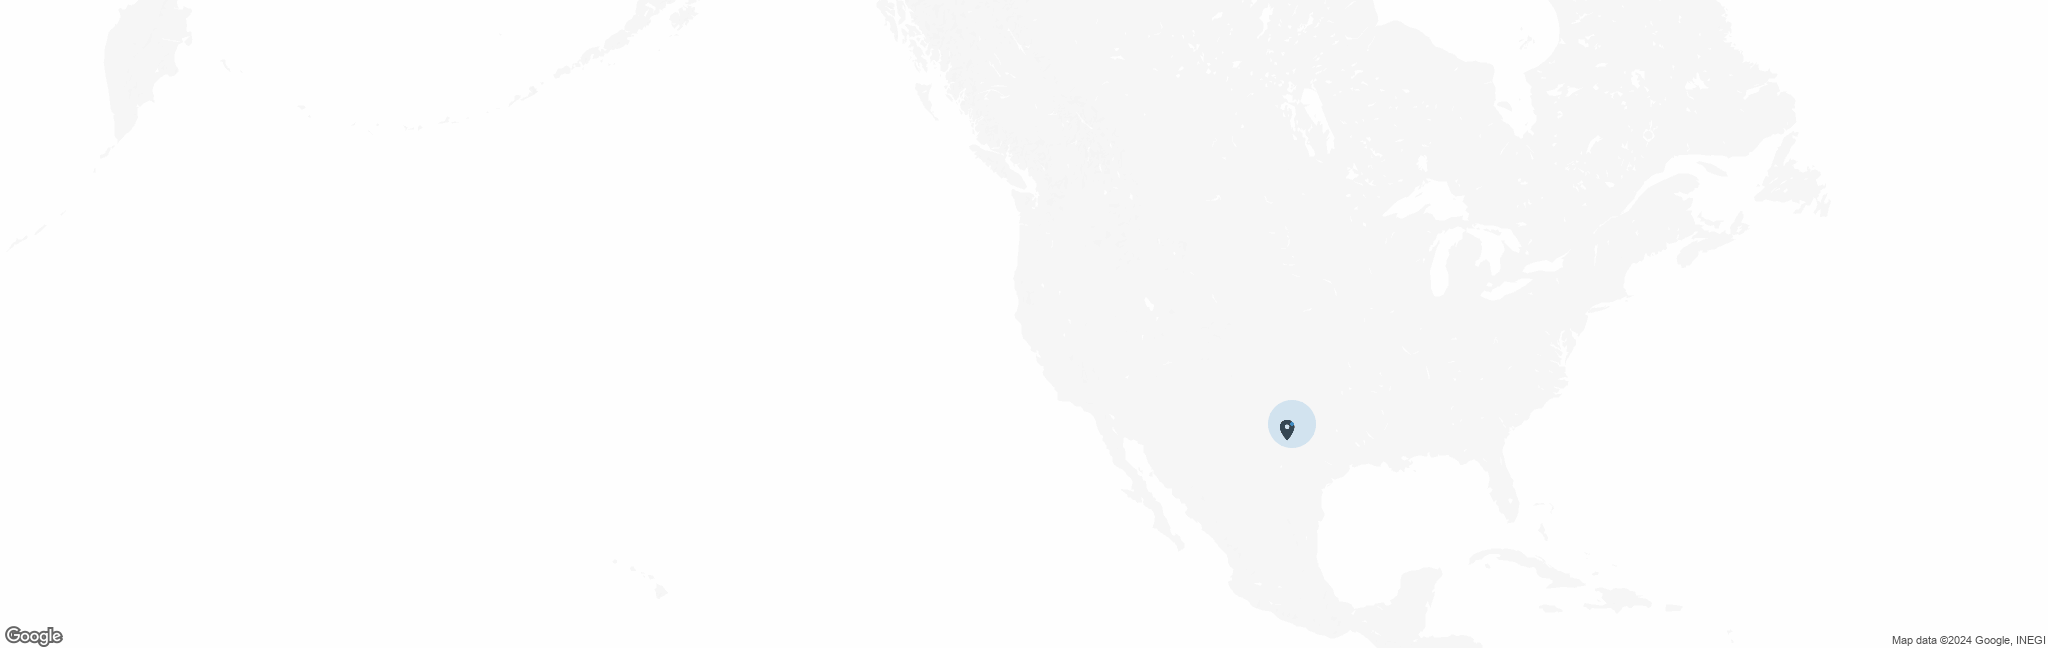 Map of US with pin of San Angelo Family Network location